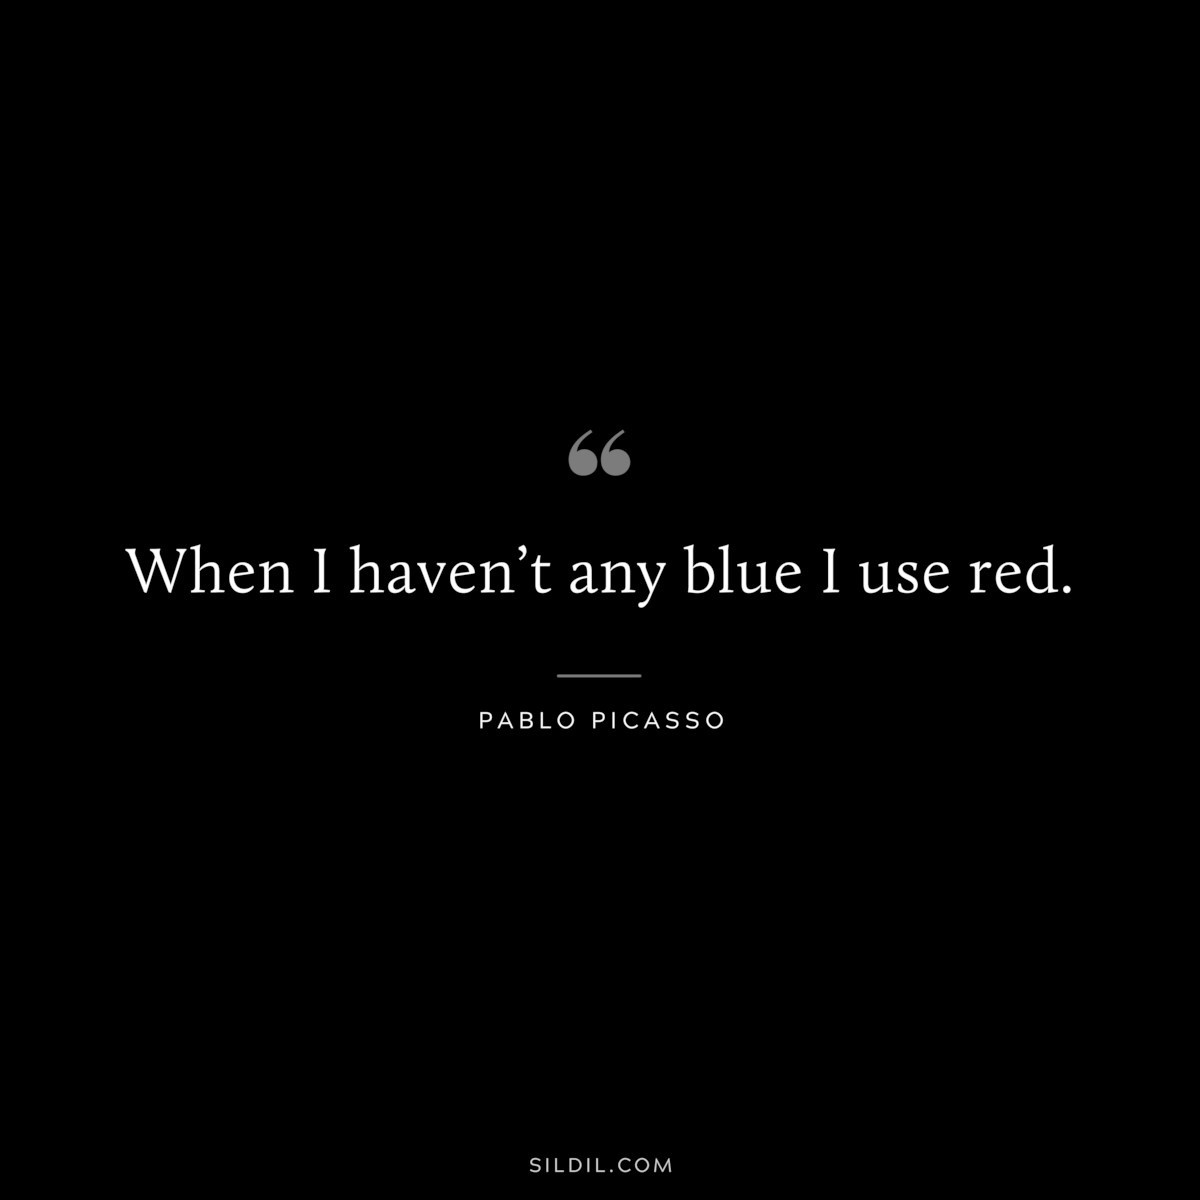 When I haven’t any blue I use red. ― Pablo Picasso